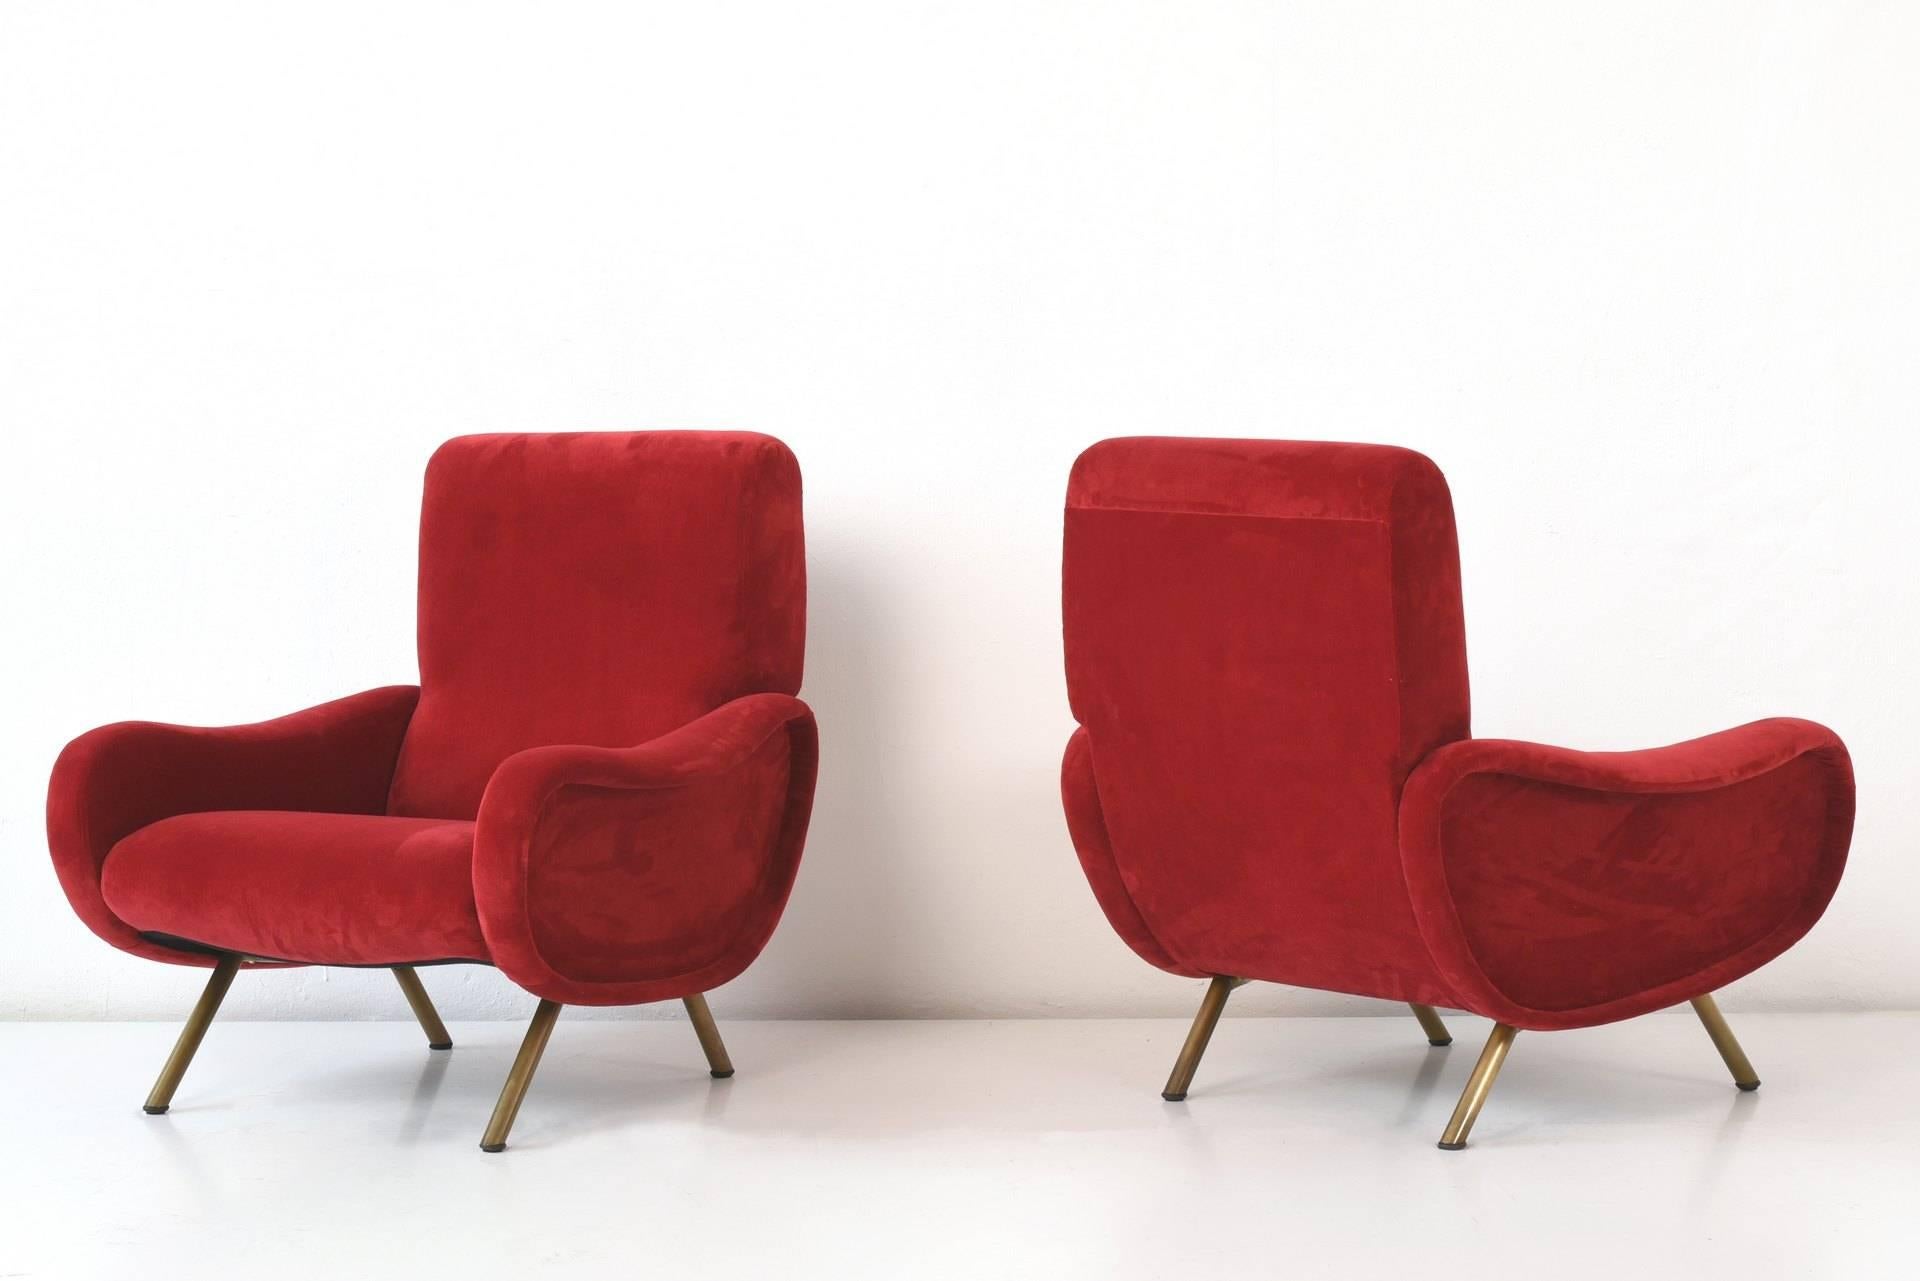 1951, when the easy chairs were presented for the first time at the Milan Furniture Fair, Marco Zanuso received a 